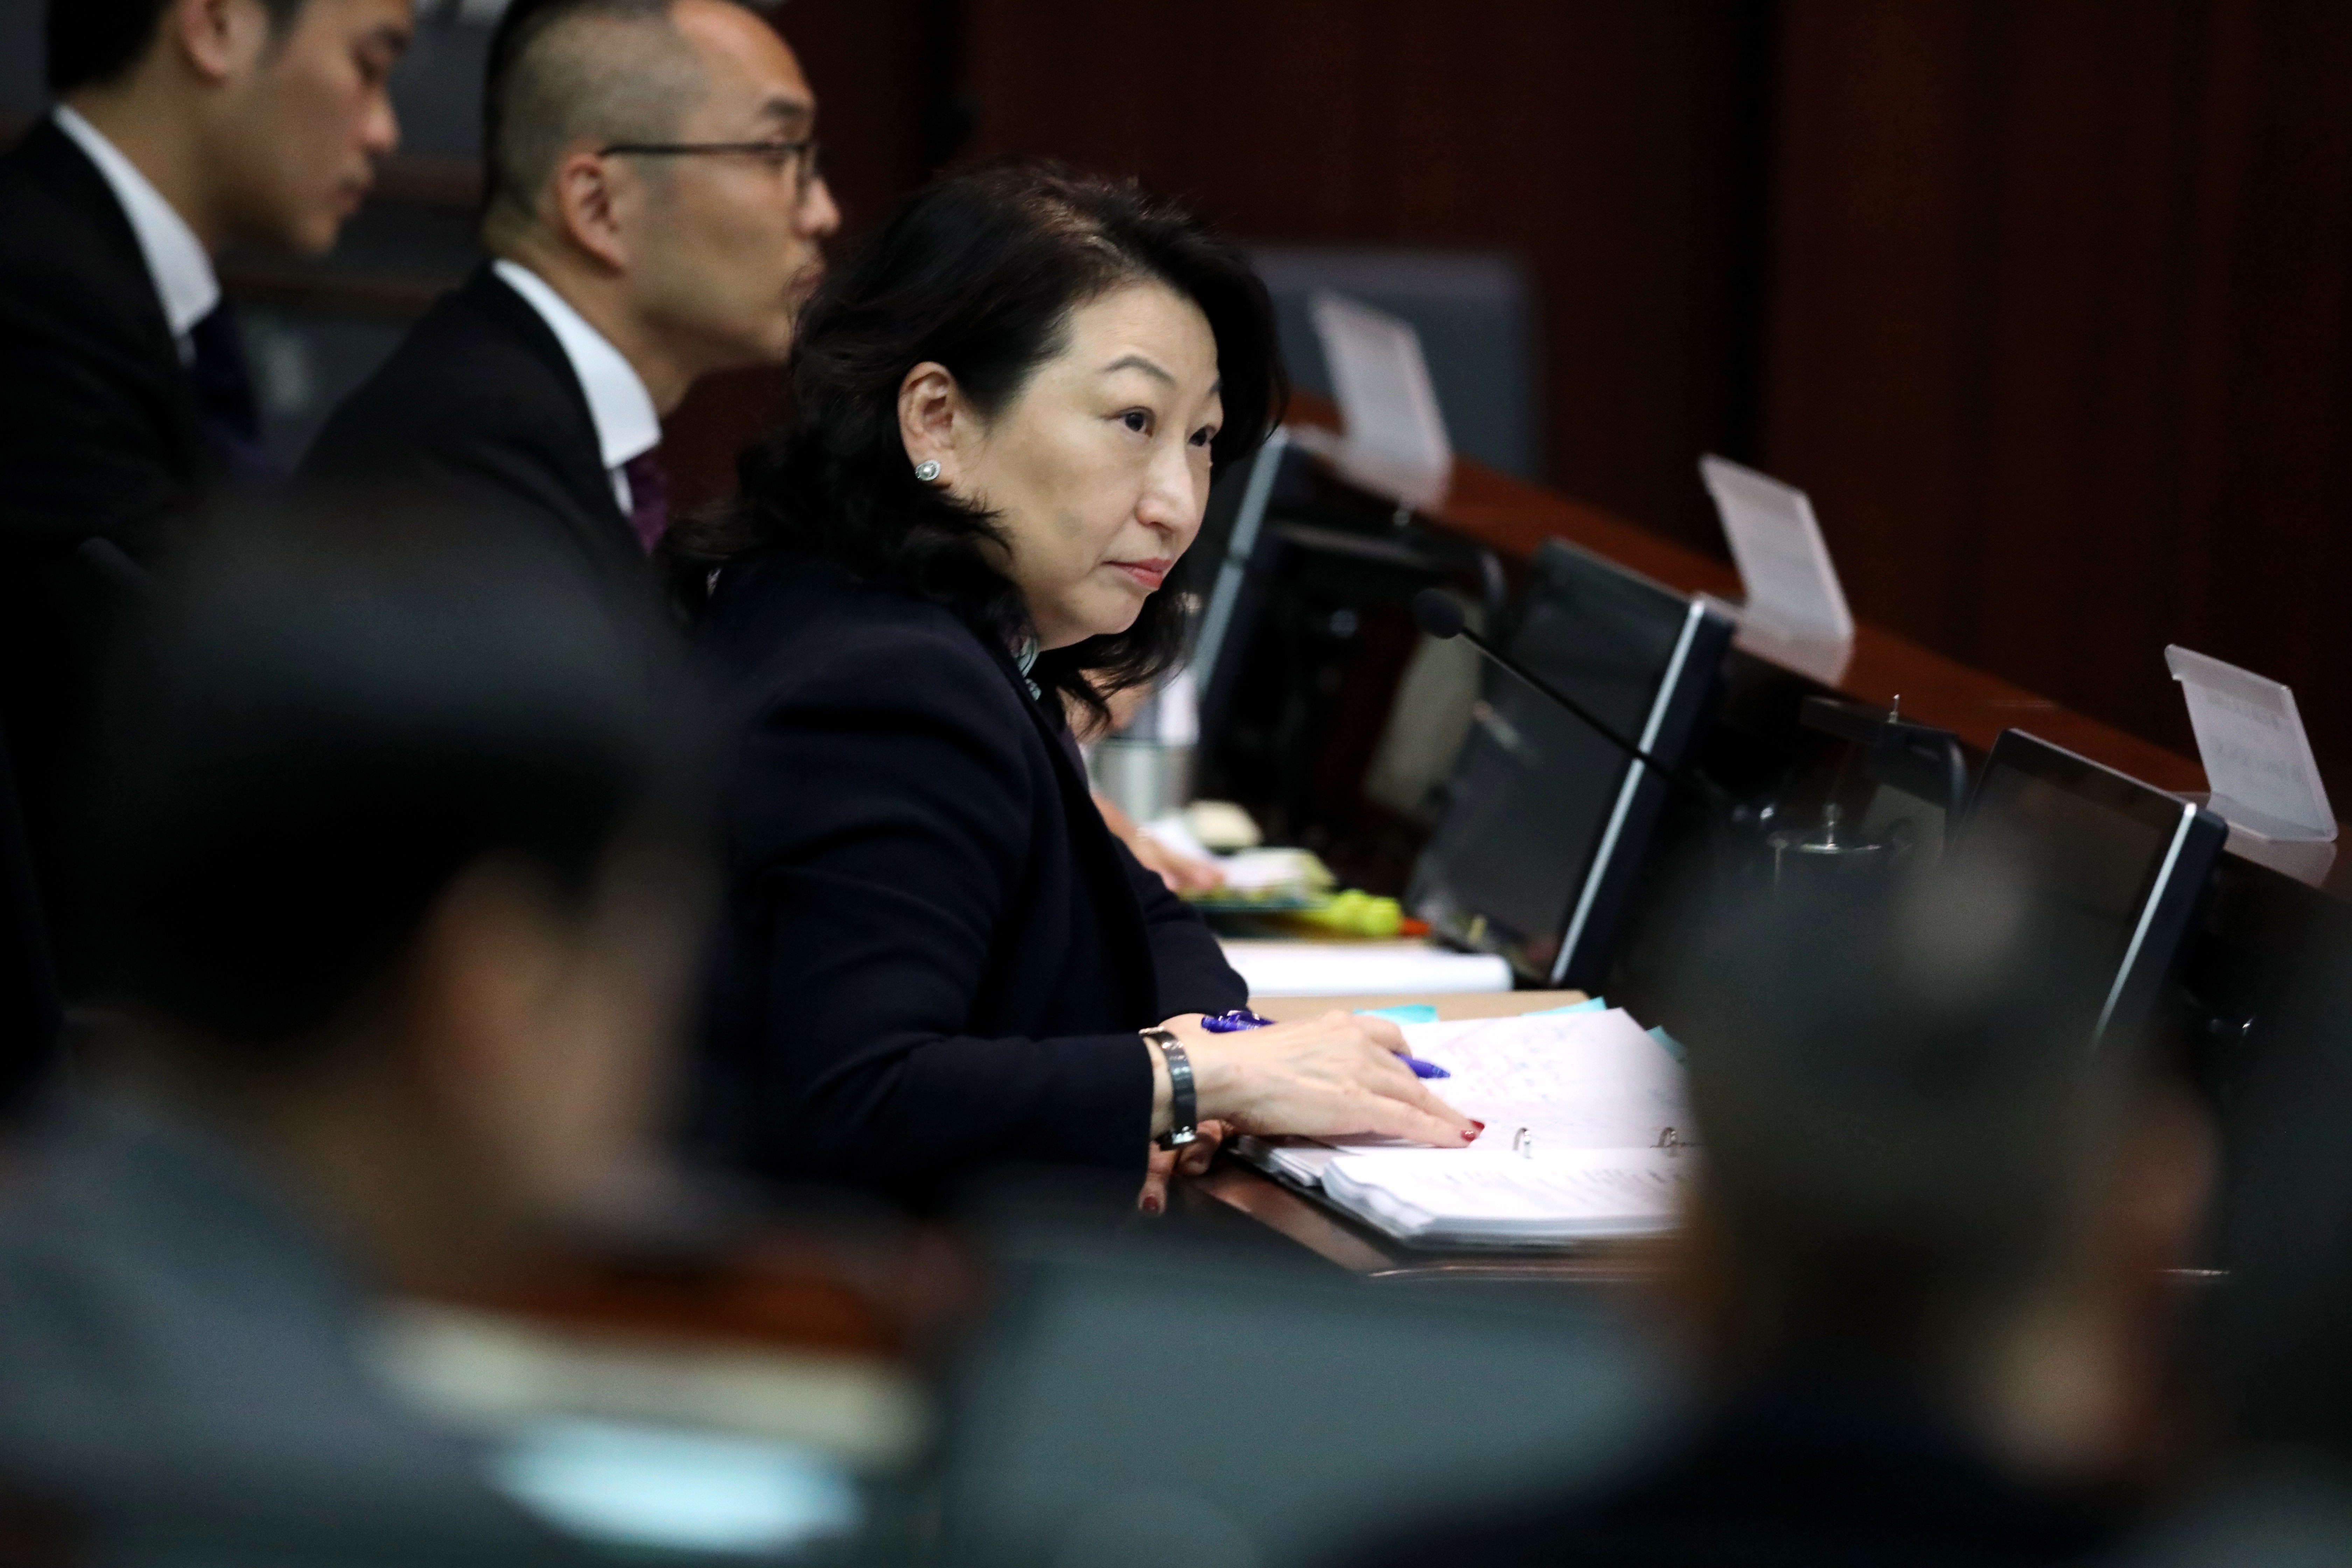 Teresa Cheng says she will carry out her duty with resolve, humanity and professionalism. Photo: Sam Tsang/SCMP